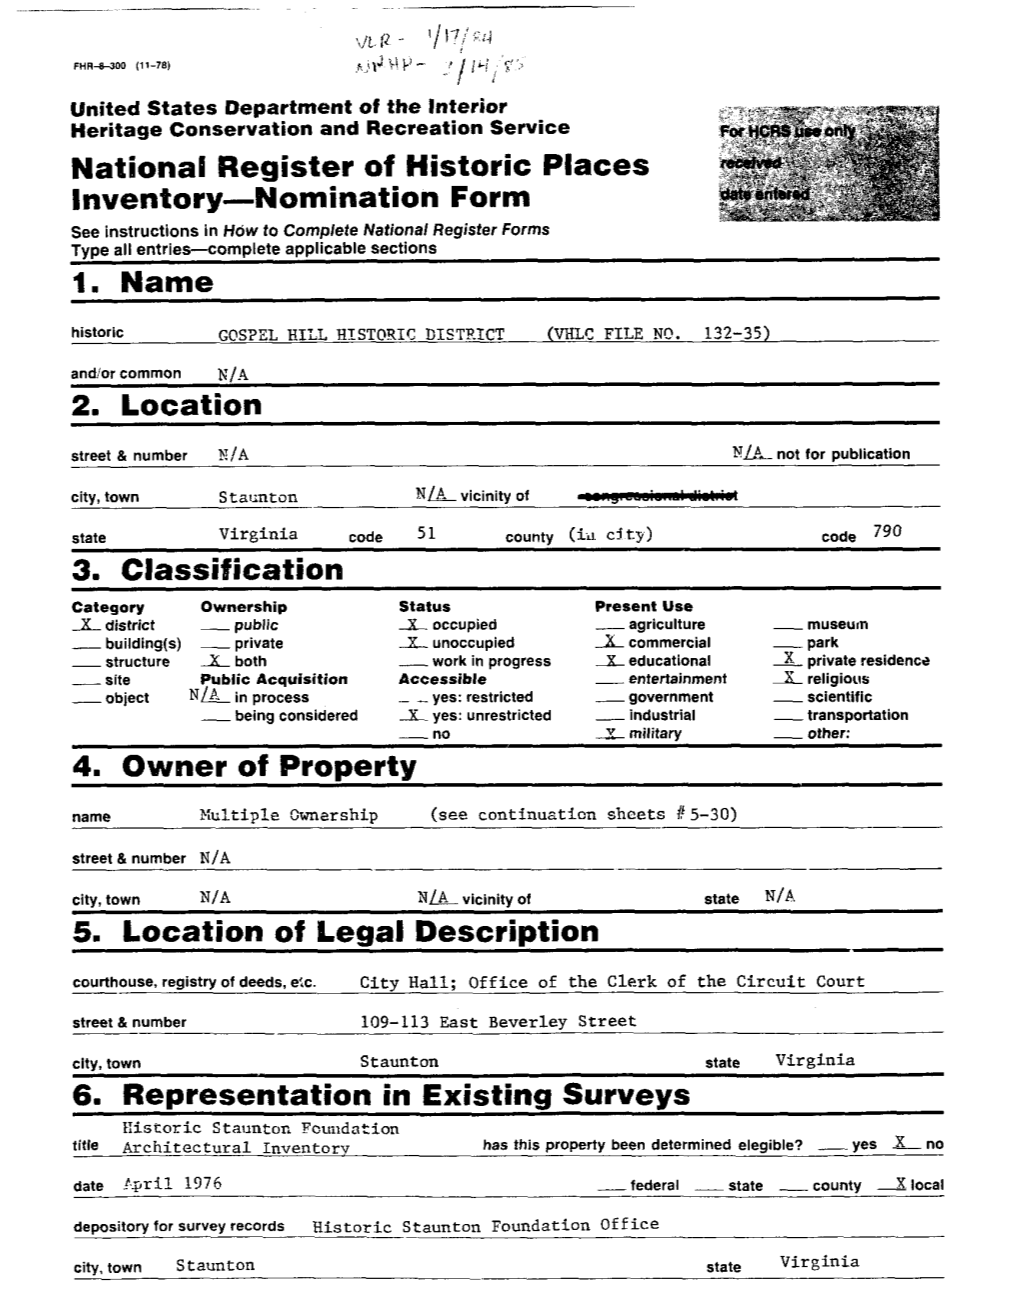 Nomination Form See Instructions in How to Complete National Register Forms Type All Entries--Complete Applicable Sections - 1